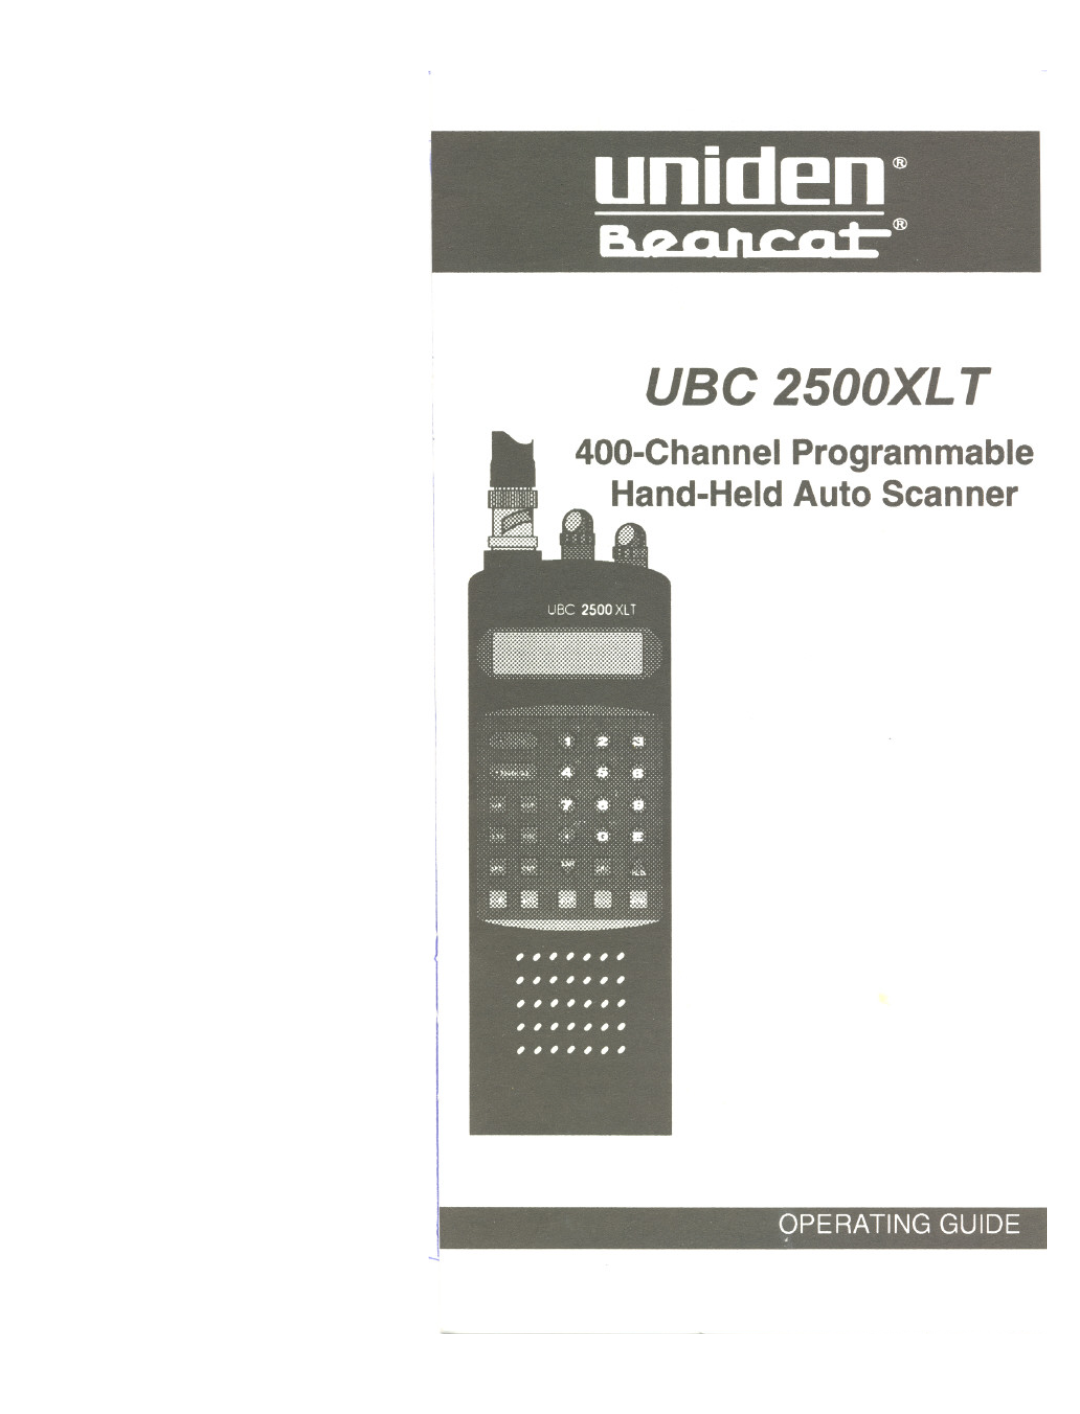 Uniden UBC 2500XLT manual Operating Guide, USC 2500XL T, Channel Programmable Hand-Held Auto Scanner 